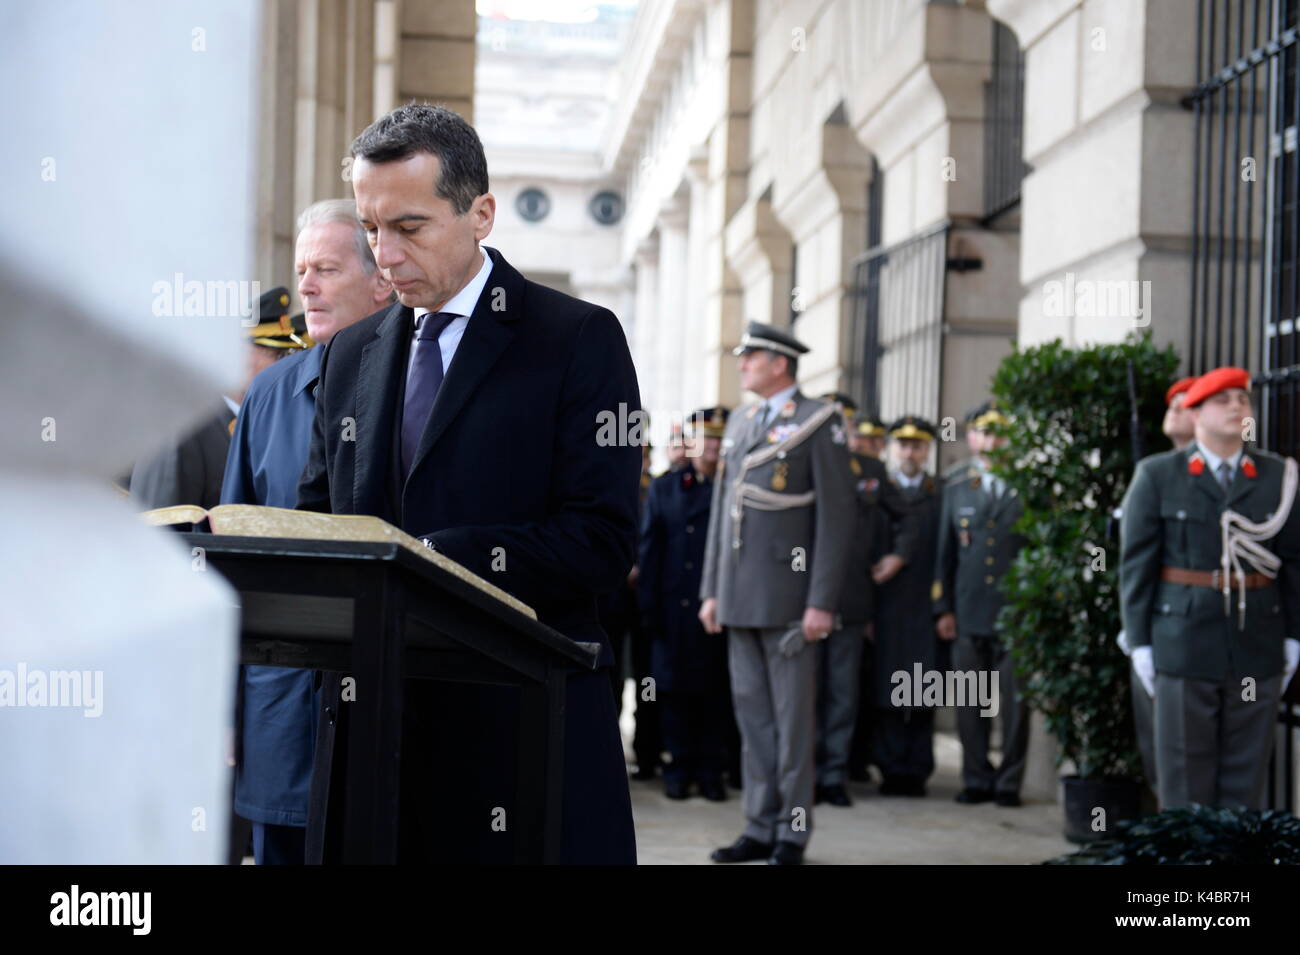 Governo federale austriaco, cancelliere federale Christian Kern e Vice Cancelliere Reinhold Mitterlehner Foto Stock